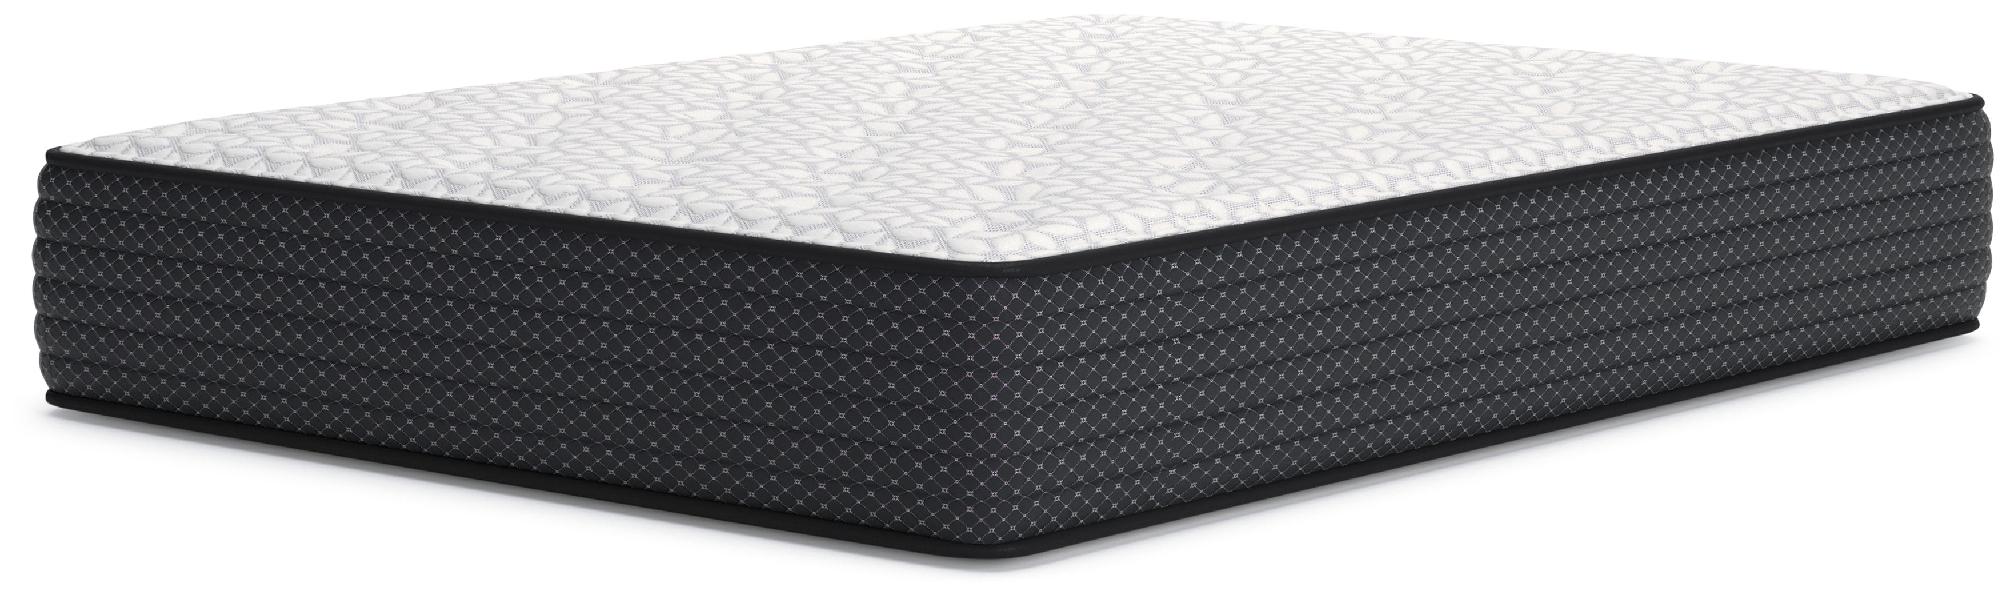 Image of Limited Edition Plush - White - Queen Mattress